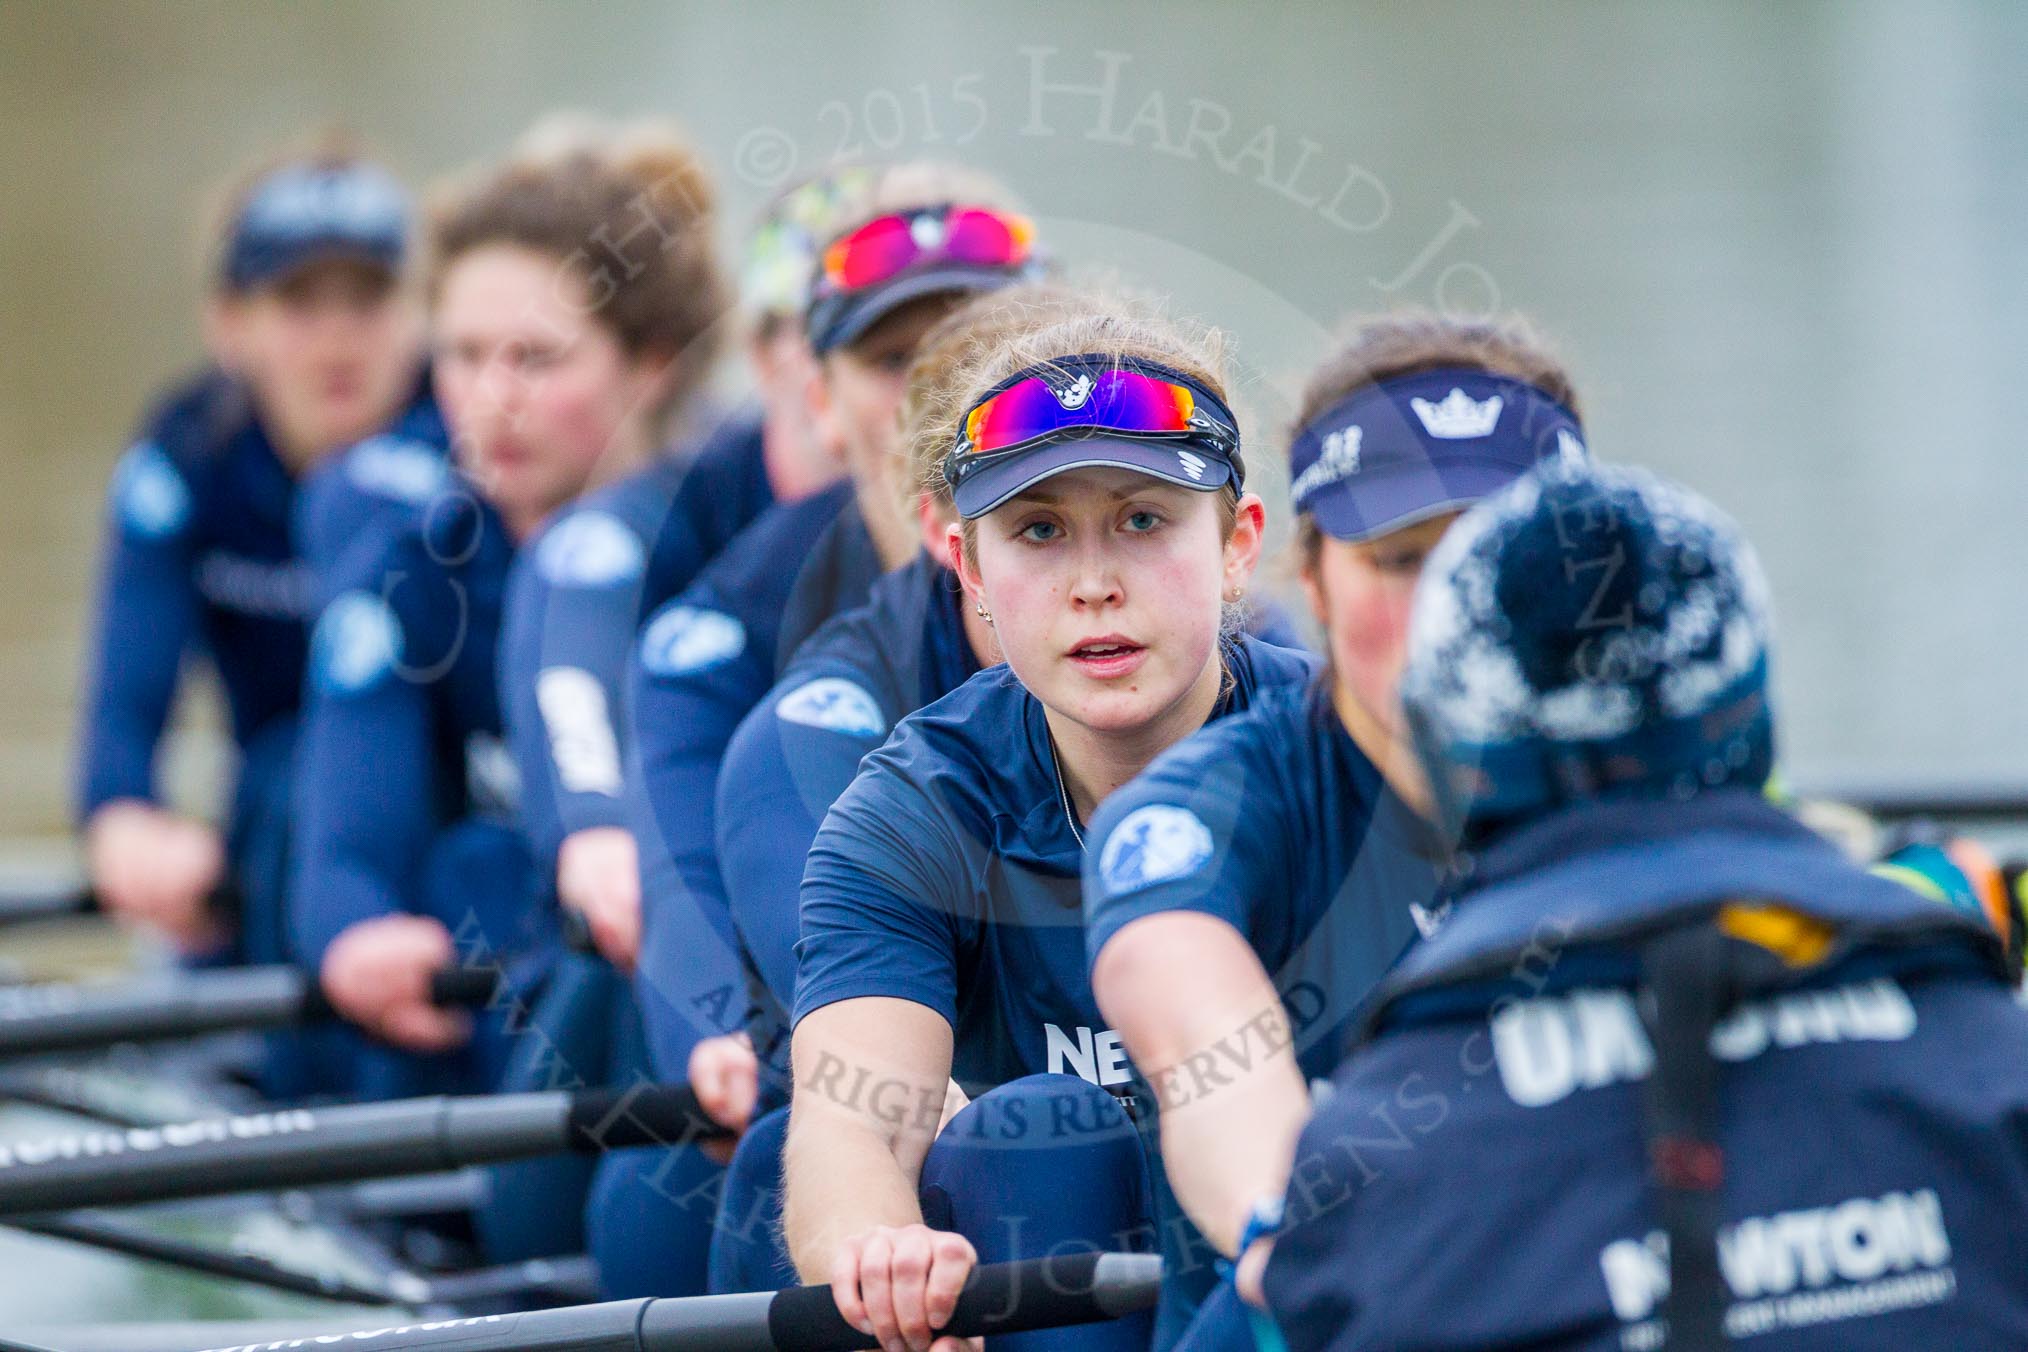 The Boat Race season 2016 - OUWBC training Wallingford: Maddy Badcott, OUWBC president and 7 seat in the Oxford Blue Boat.
River Thames,
Wallingford,
Oxfordshire,

on 29 February 2016 at 16:34, image #146